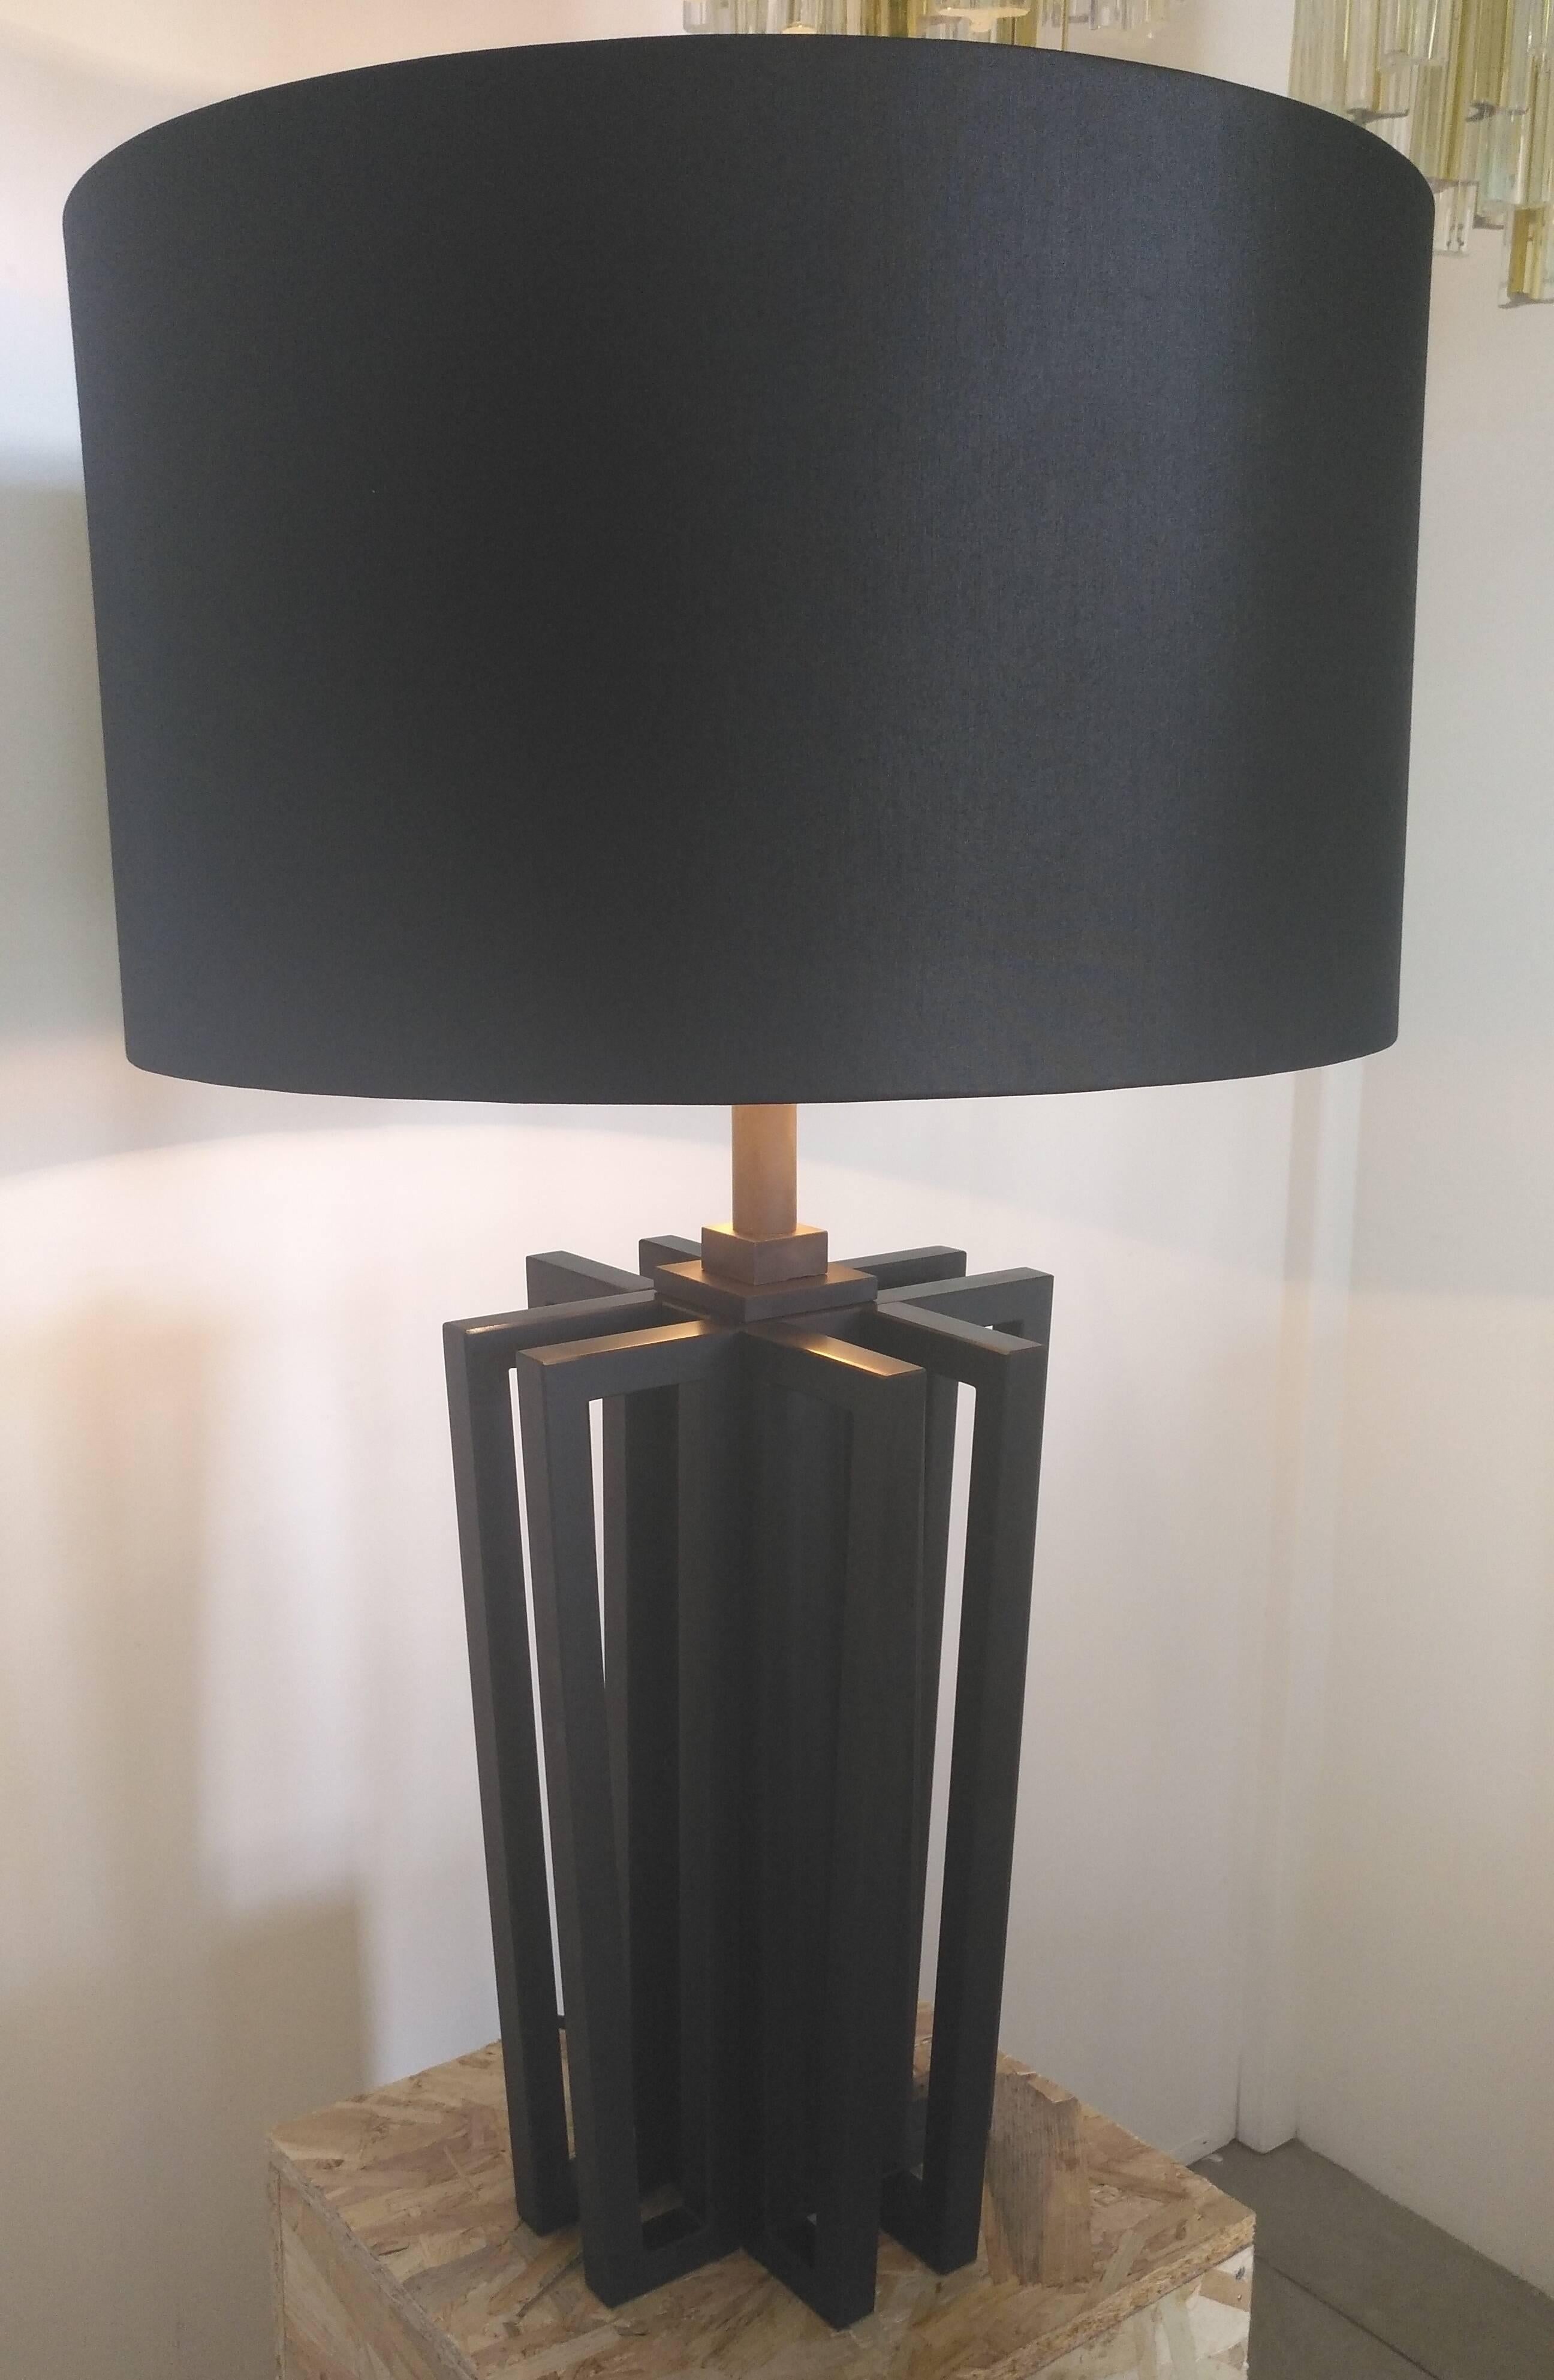 Beautiful table lamps in absolute black marble , with black silk shade gilded inside
This lamp is called 